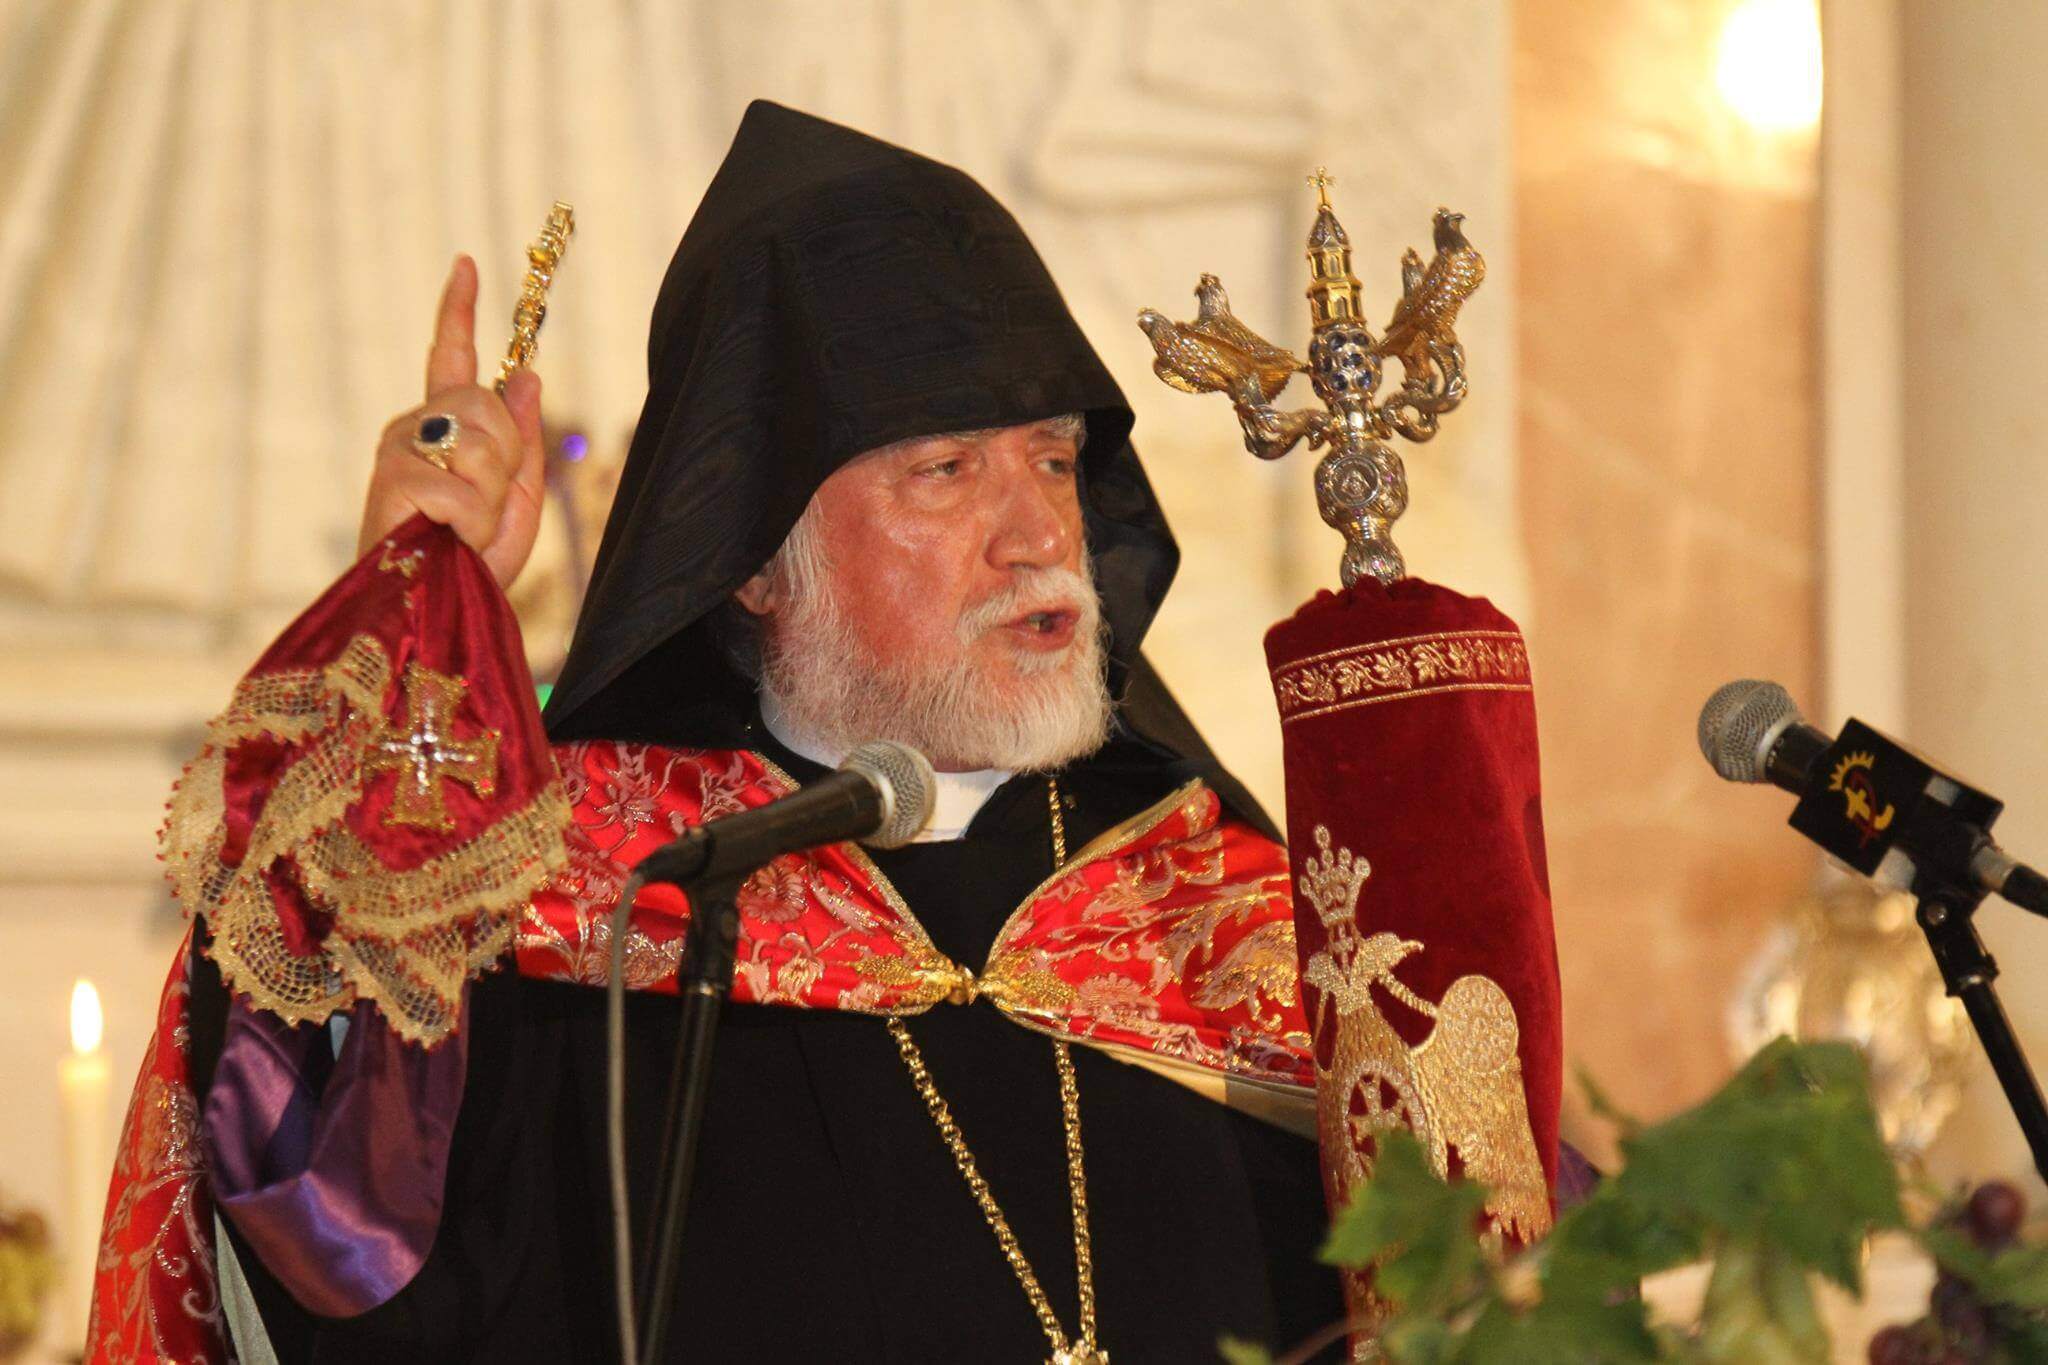 Armenia, Artzakh (Karabagh) and the People are above everything, Stated His Holiness Aram I